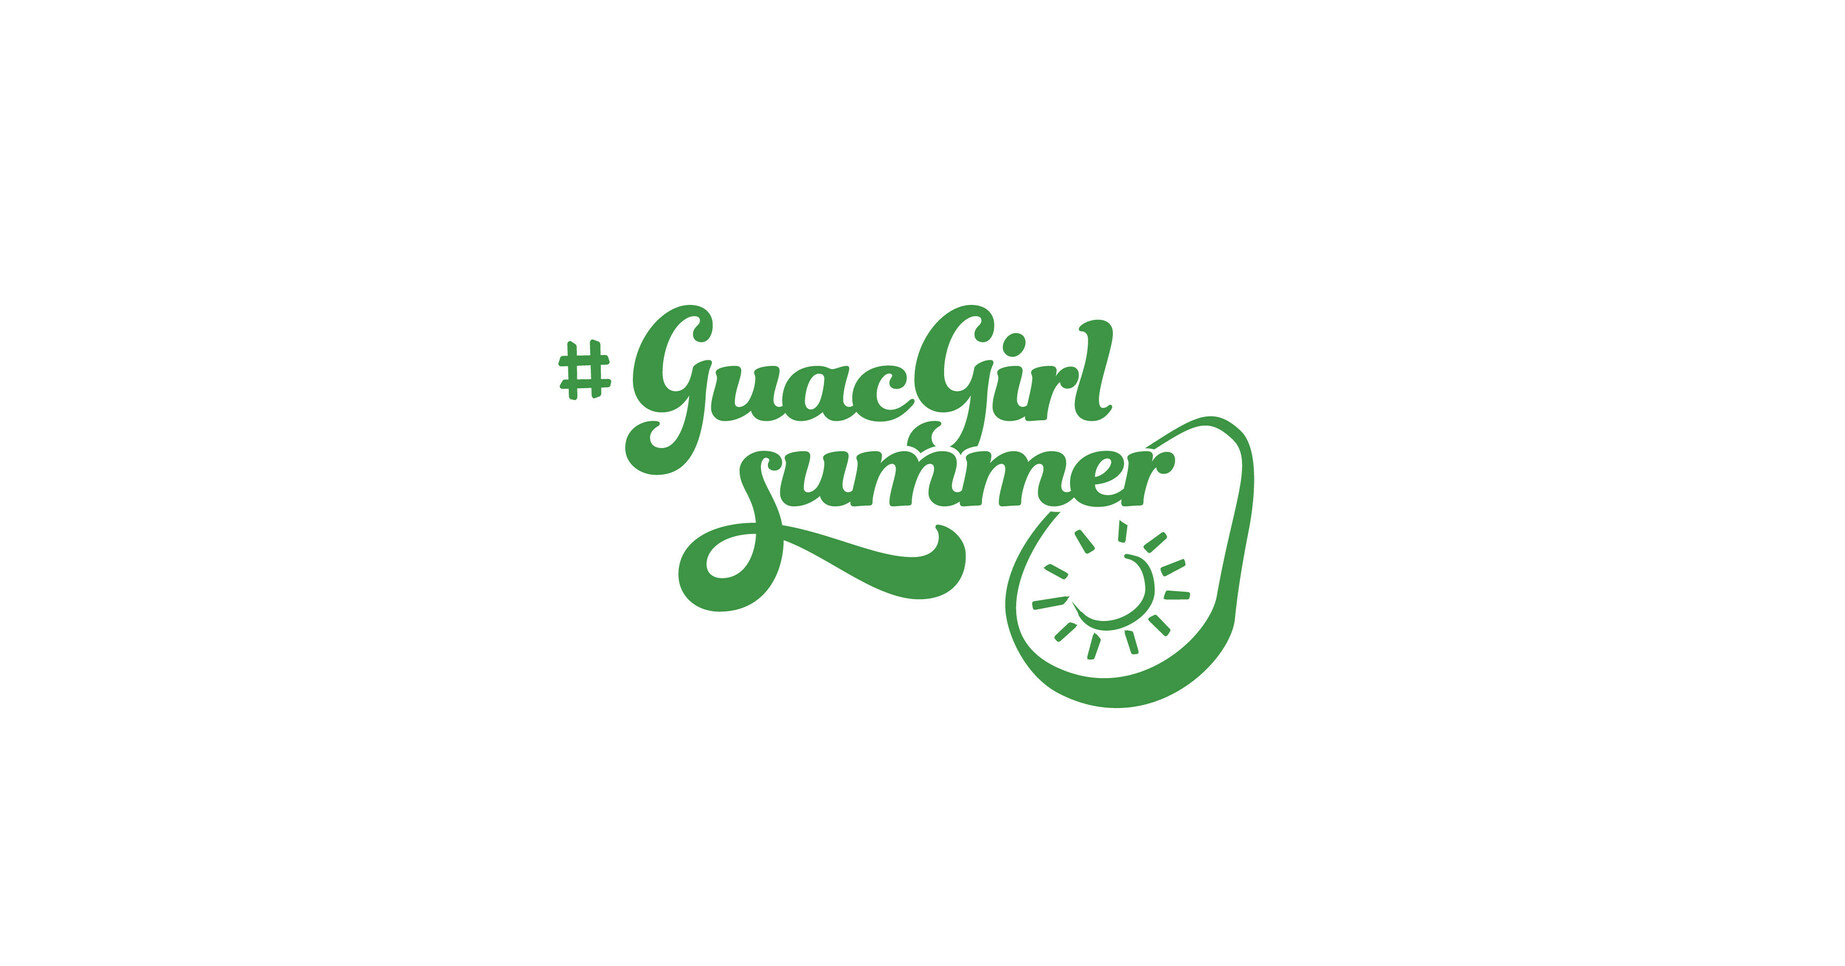 GOOD FOODS LAUNCHES #GUACGIRLSUMMER